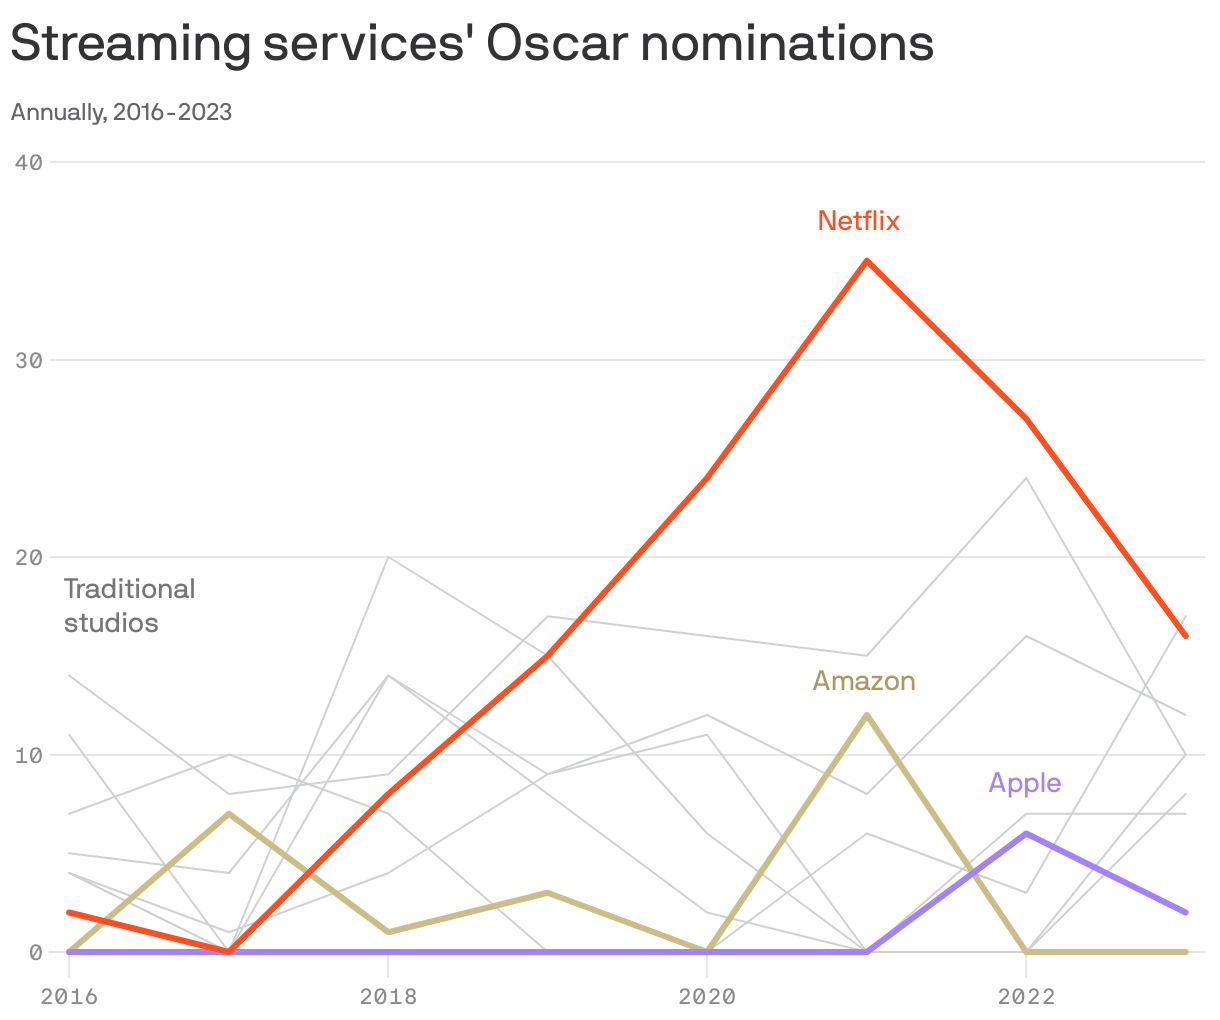 Streaming services' Oscar nominations 